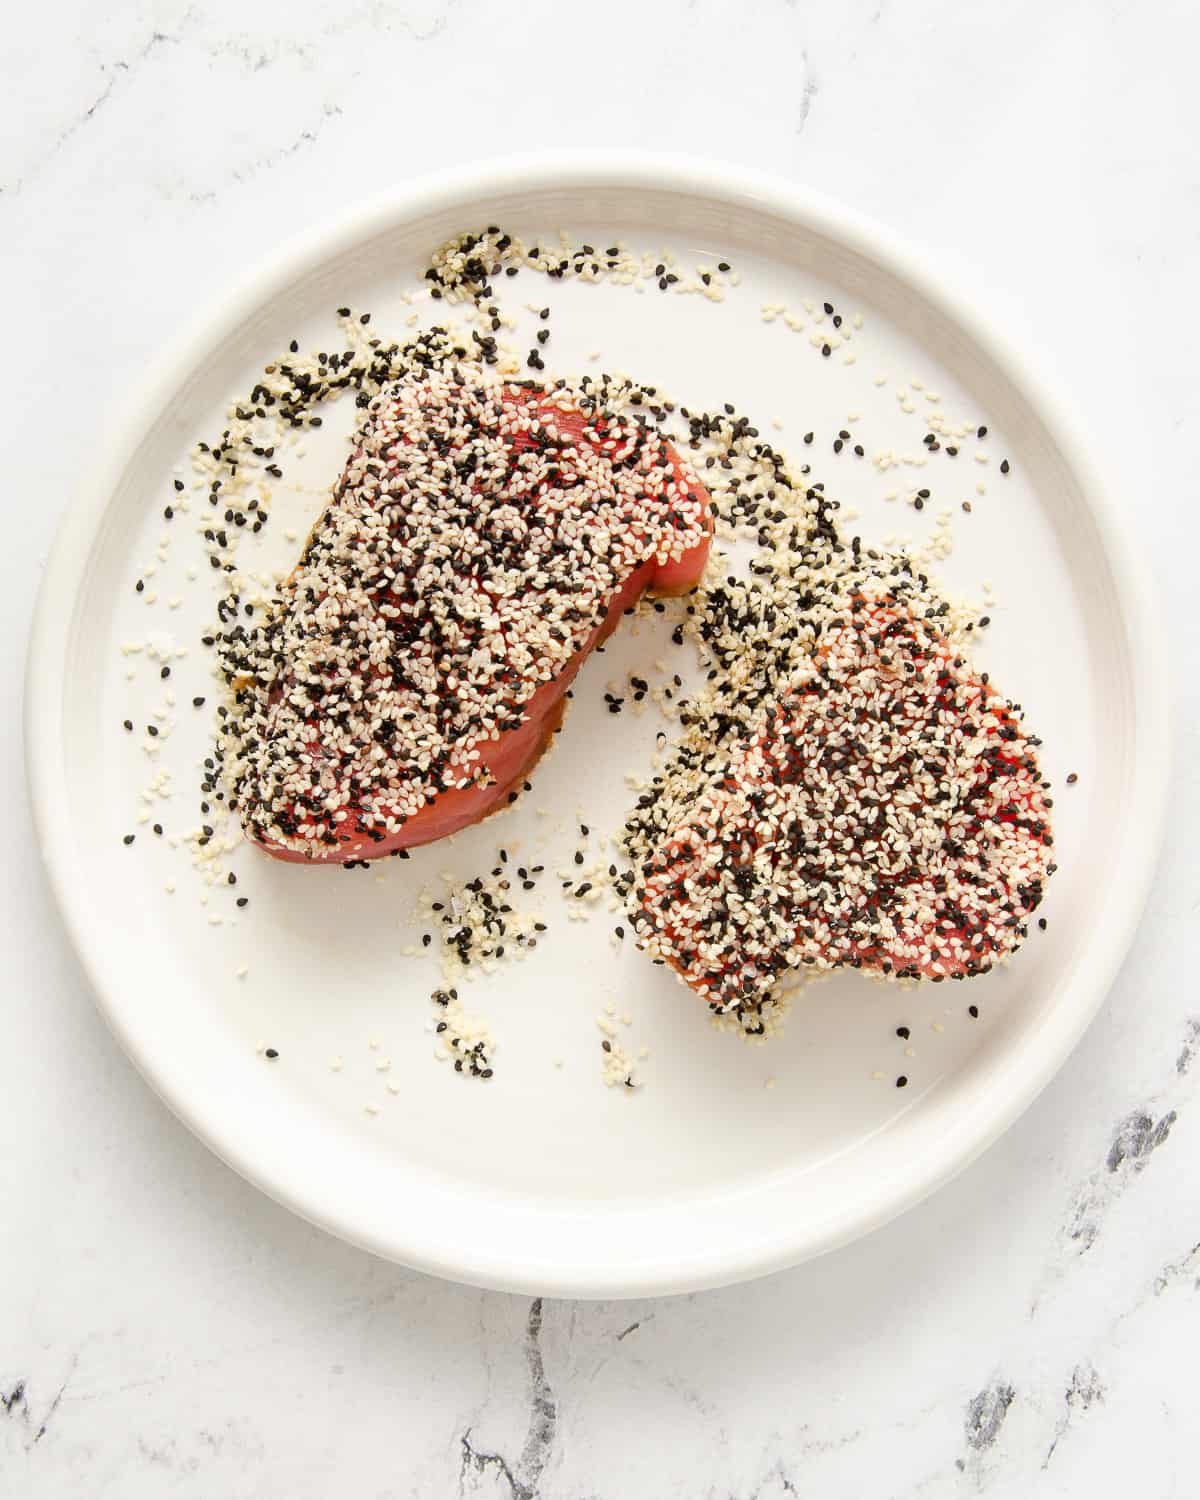 Raw ahi tuna topped with black and white sesame seeds on a white plate.